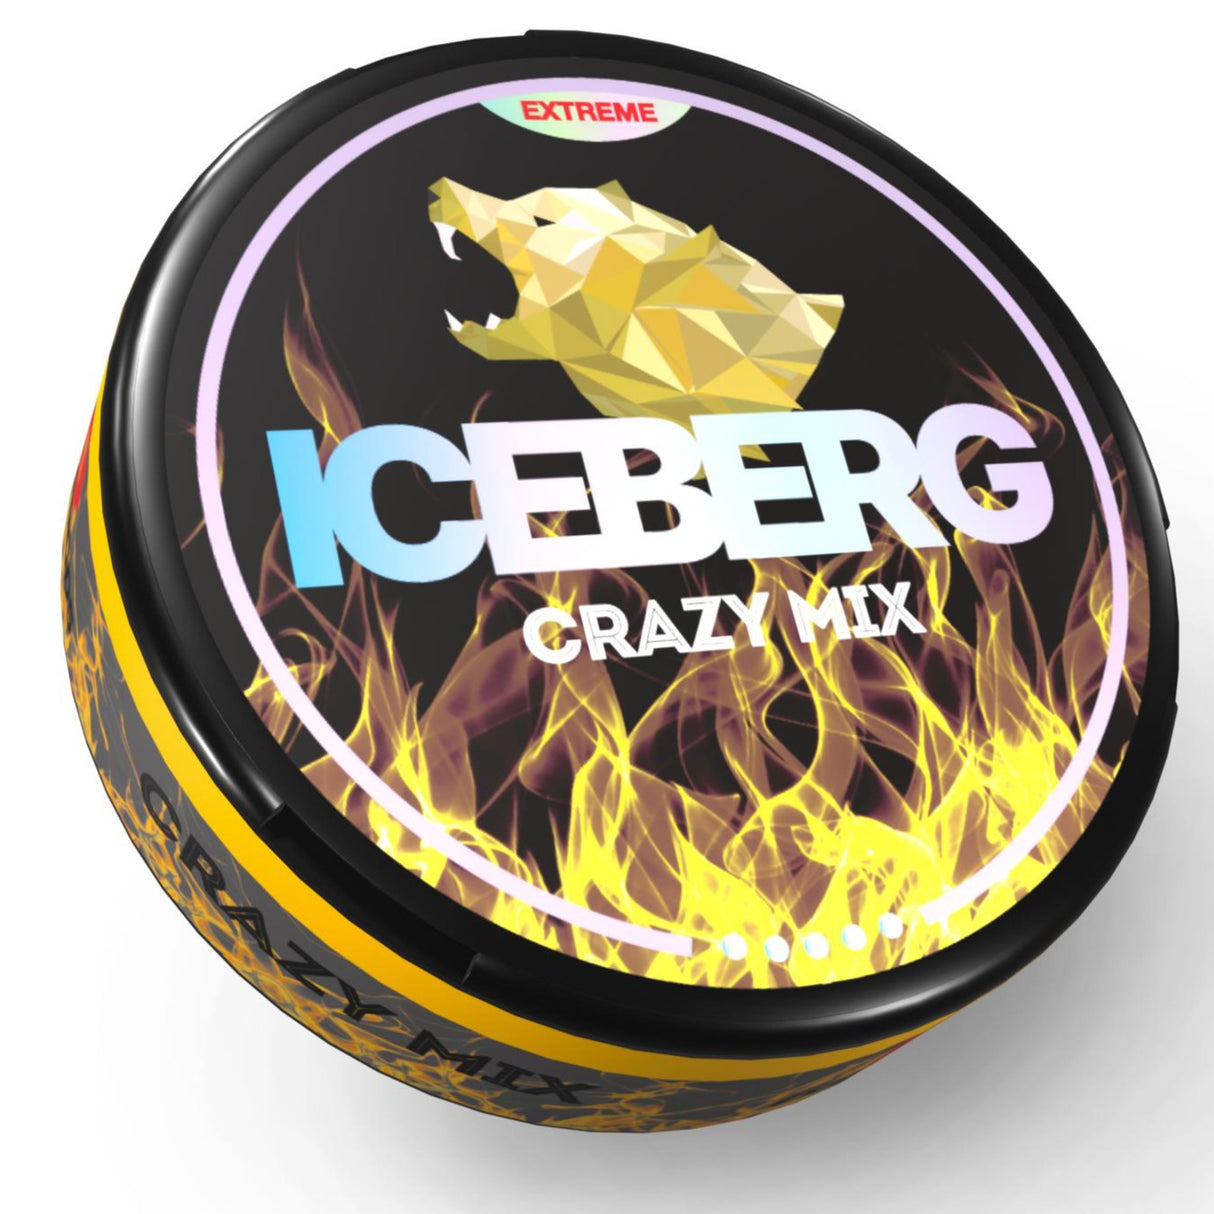 Crazy Mix Nicotine Pouches By Iceberg